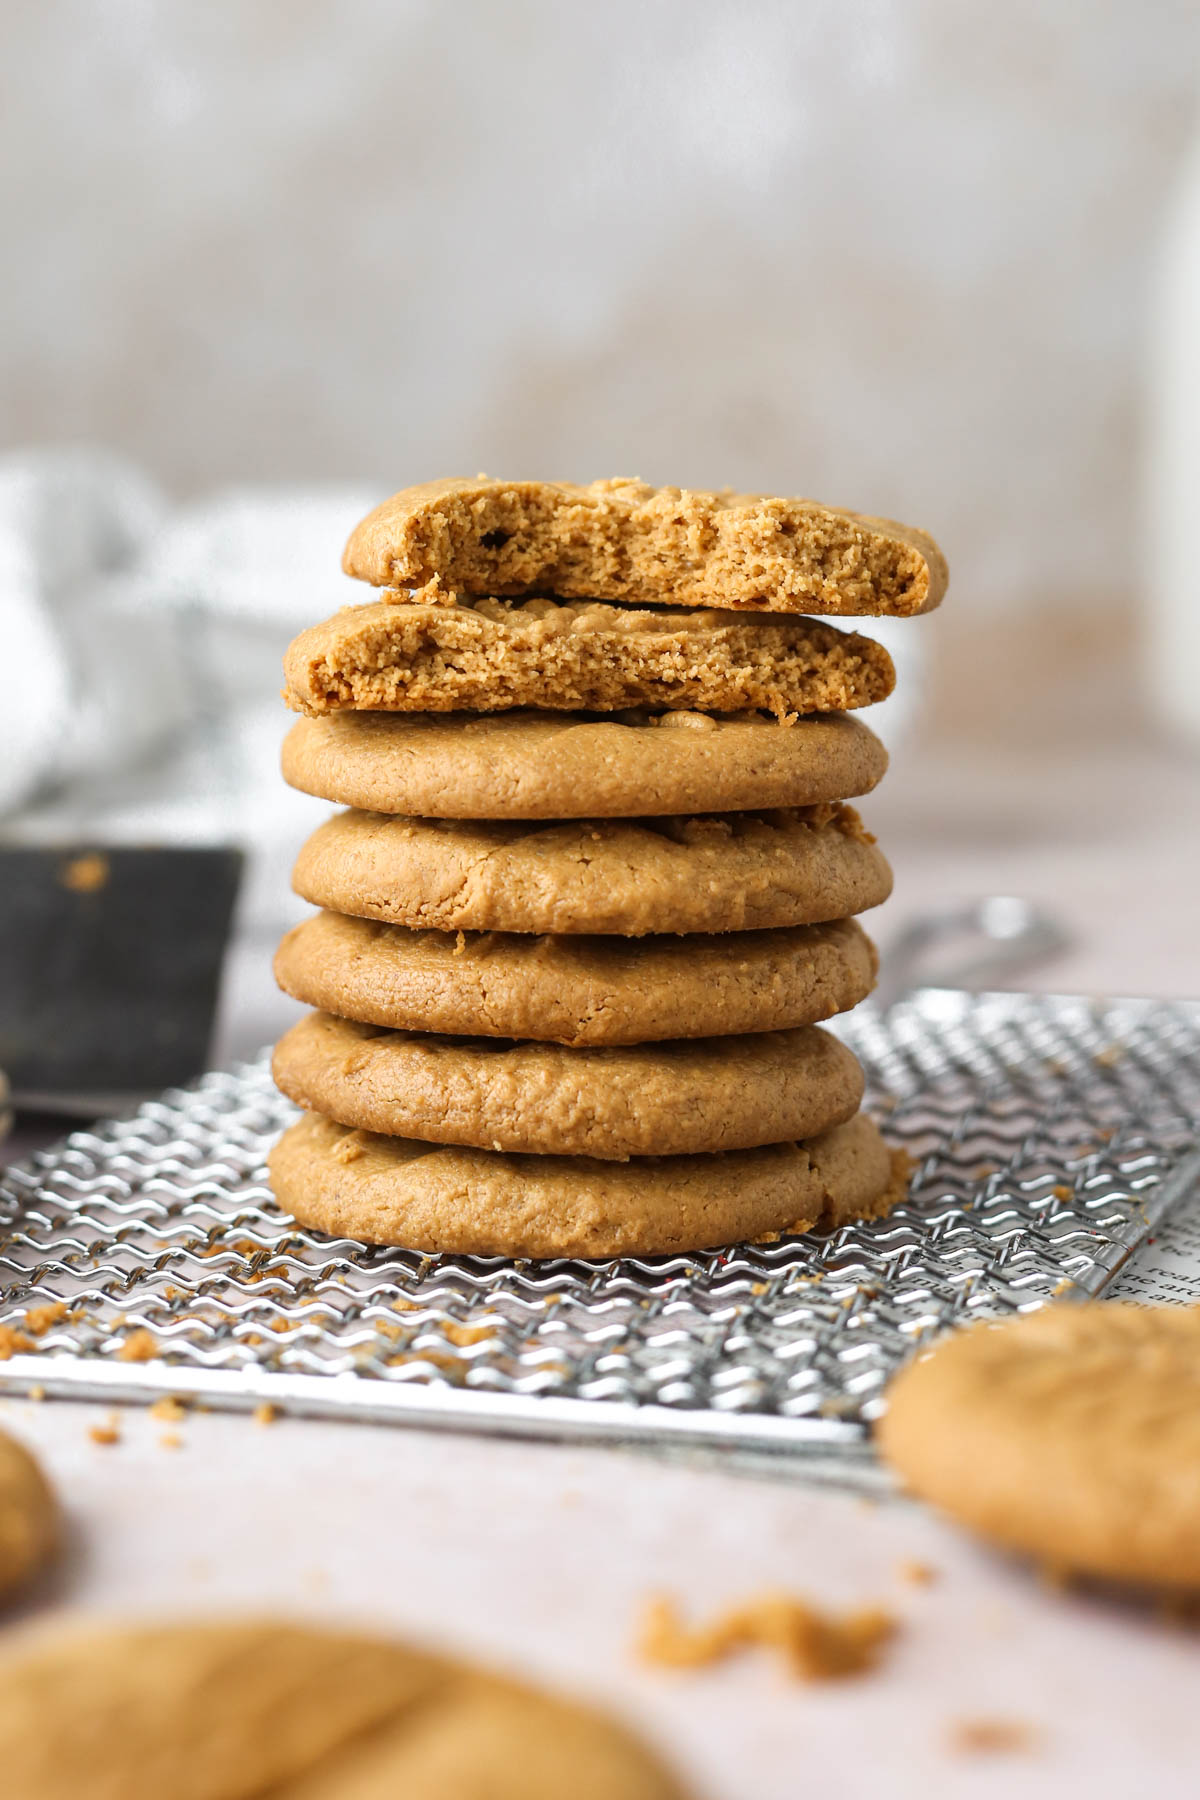 a stack of seven peanut butter cookies, with the top two cookies in the stack missing bites, showing the soft texture inside.